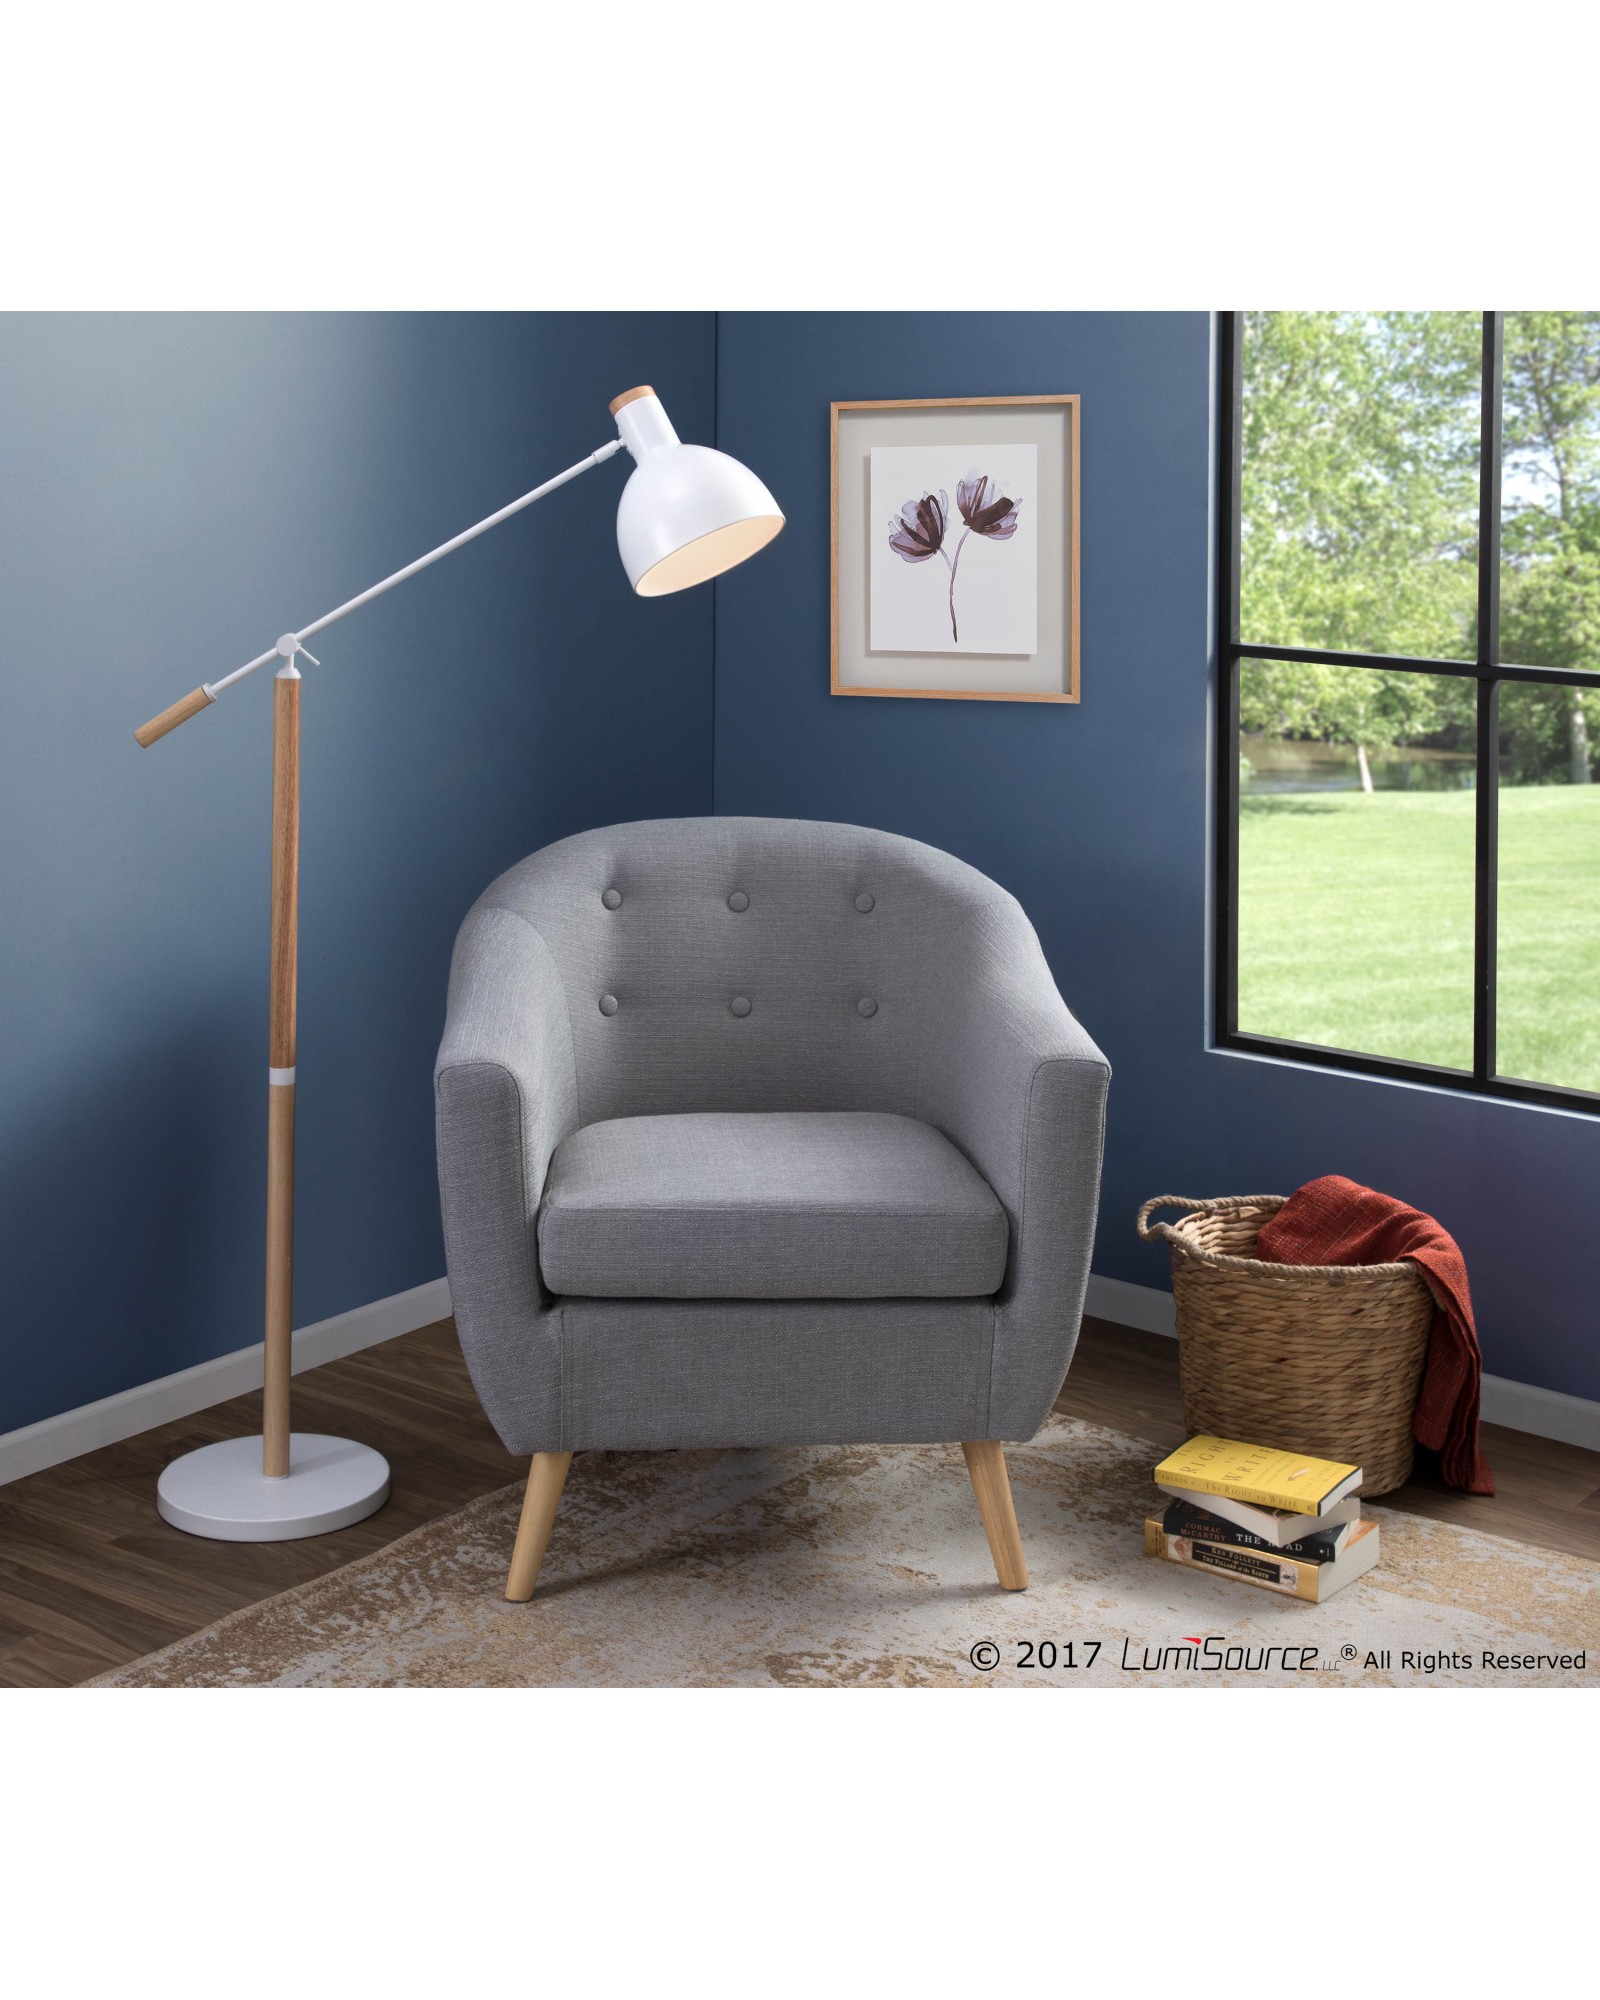 Pix Contemporary Floor Lamp in Natural Wood and Matte White